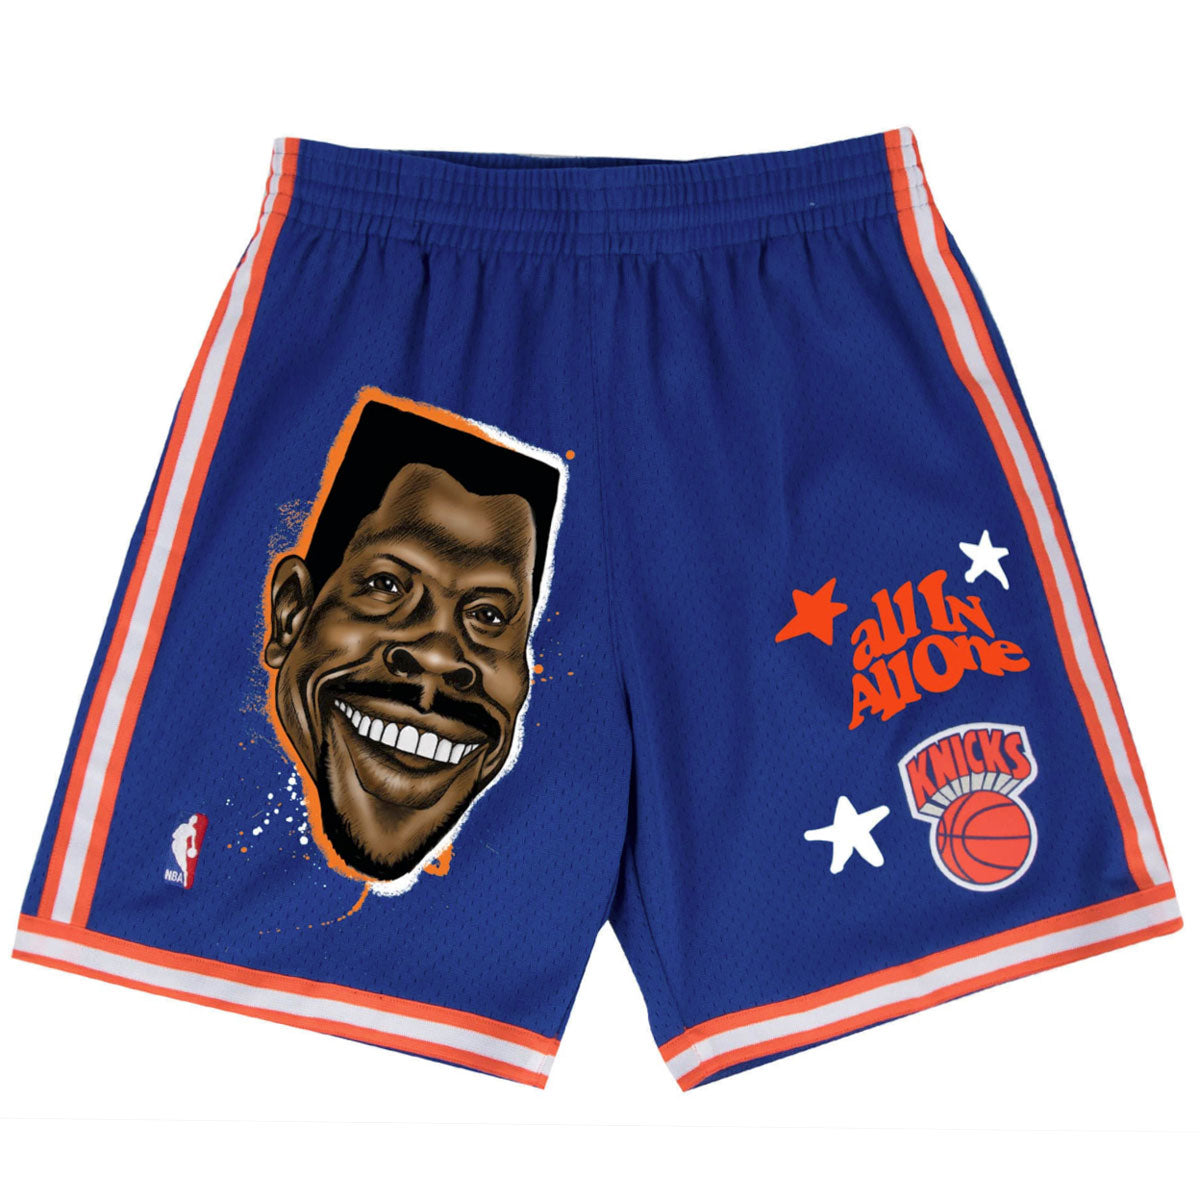 Mitchell & Ness All In One Knicks Shorts - Patrick Ewing image 1